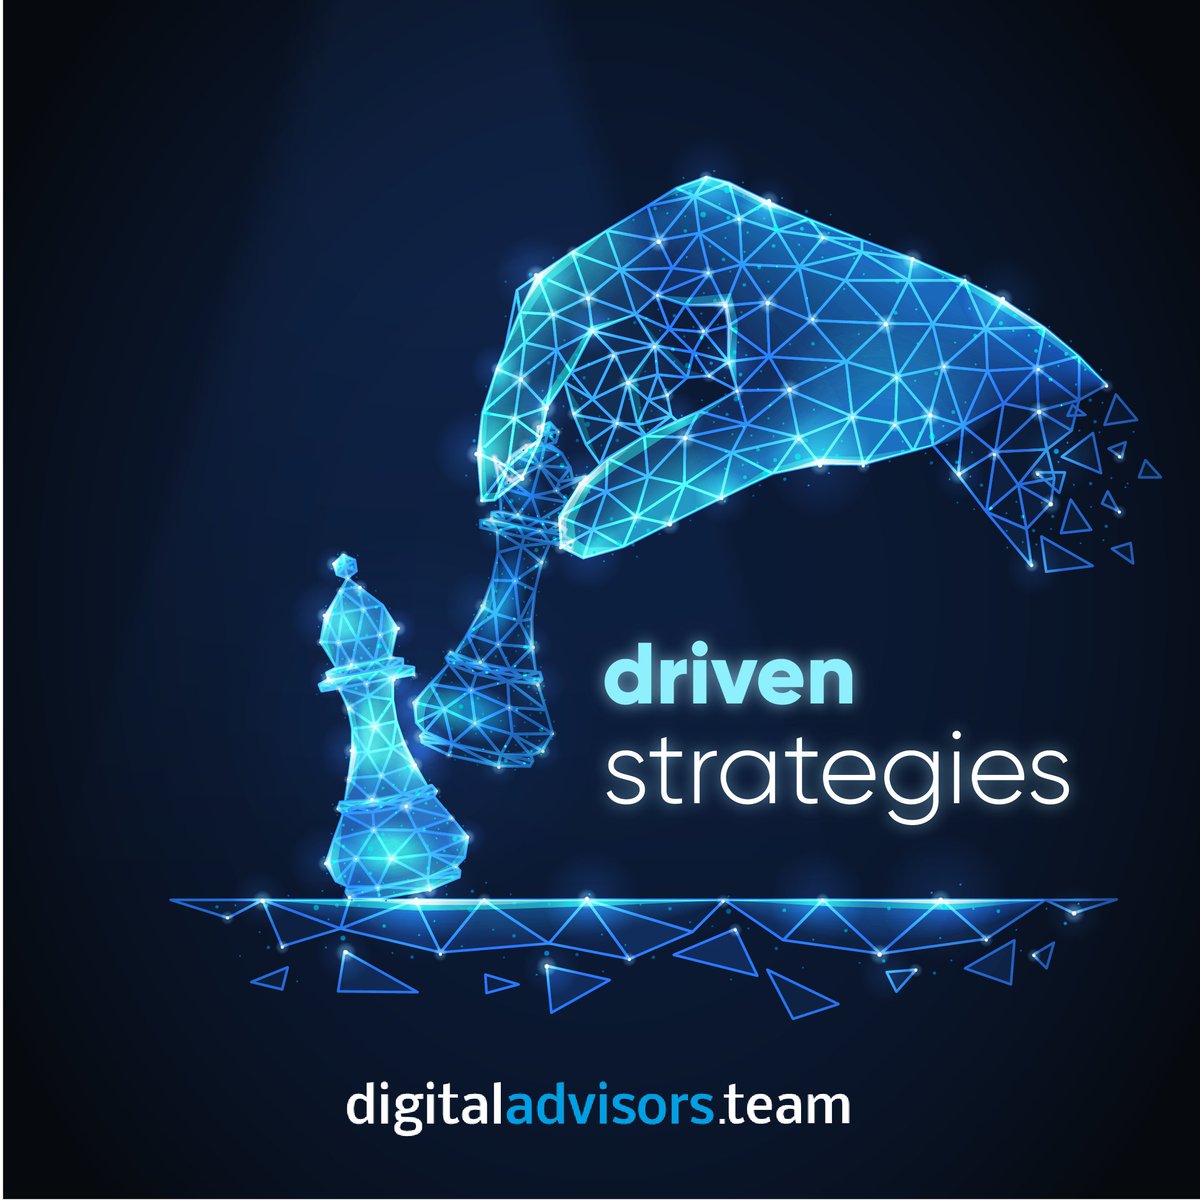 A strategy can’t be functional or efficient enough if you are powered by something more powerful.

Being driven to success does NOT equal money, it equals trustworthy stories.

#marketing #marketingservices  #success  #digitalma[...]